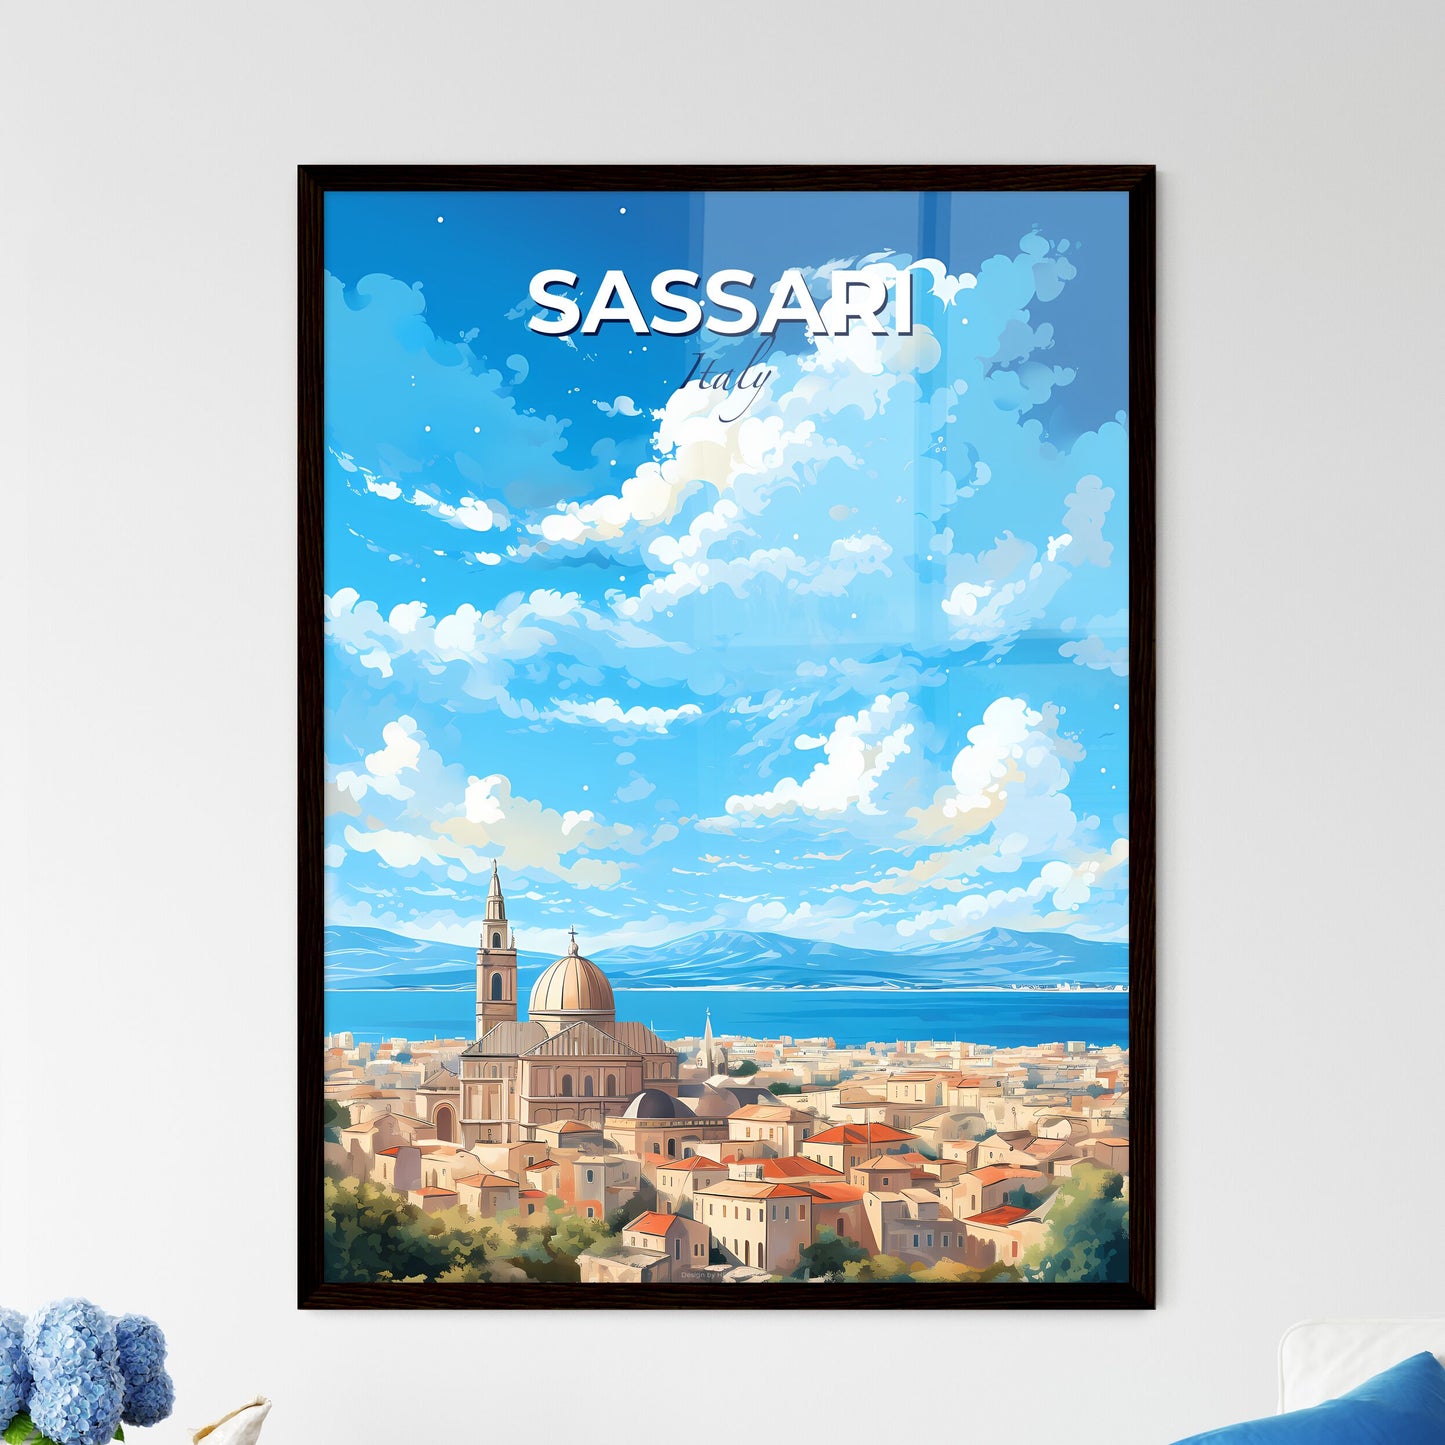 Sassari Italy Skyline - A City With A Tower And A Body Of Water - Customizable Travel Gift Default Title